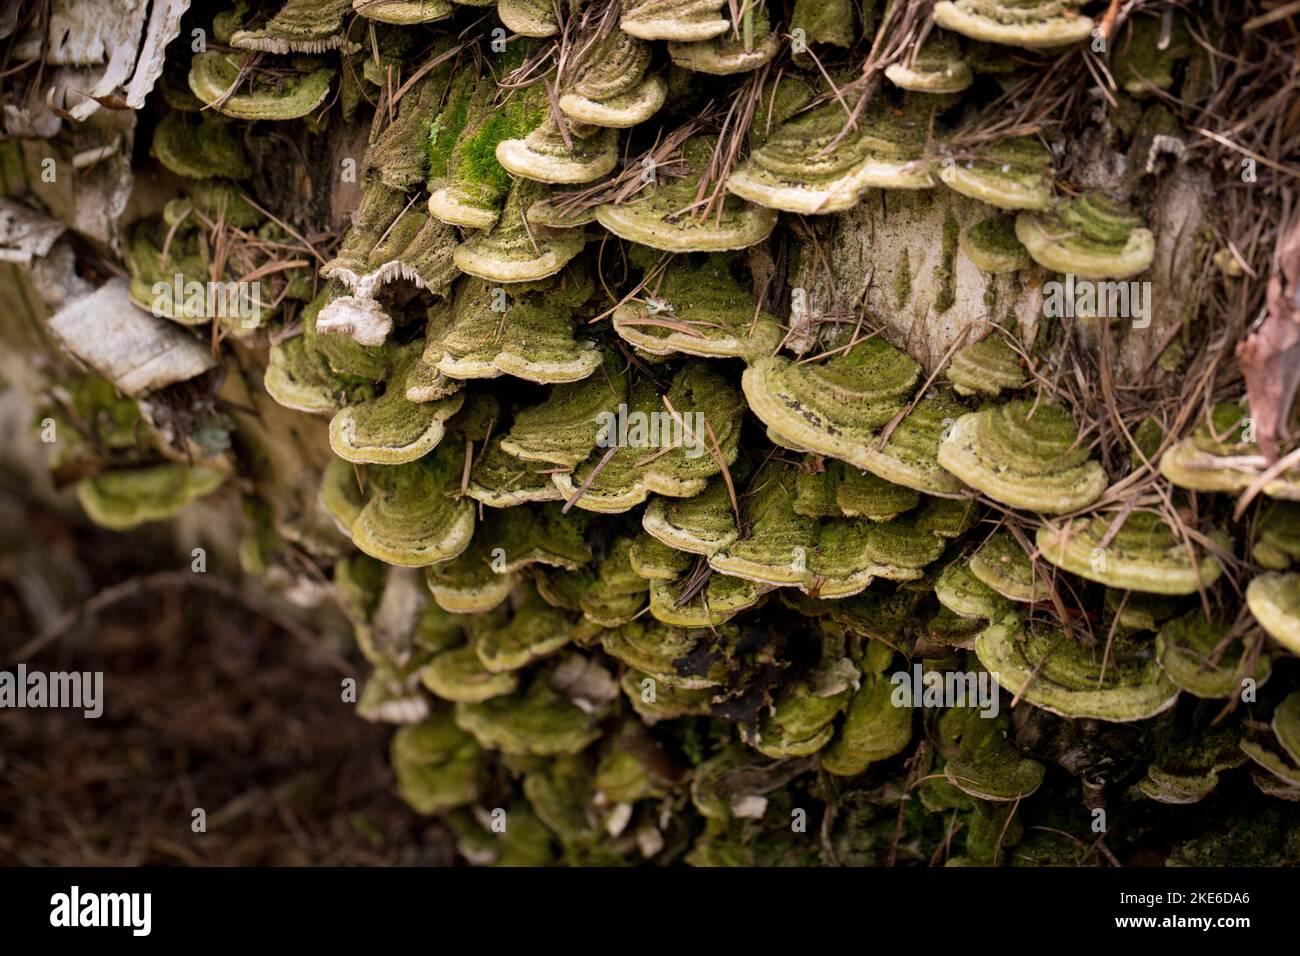 Mossy Maze Polypore mushrooms, Cerrena unicolor, found growing on the trunk of a dead red birch tree, in Troy, Montana  Synonyms of C. unicolor includ Stock Photo